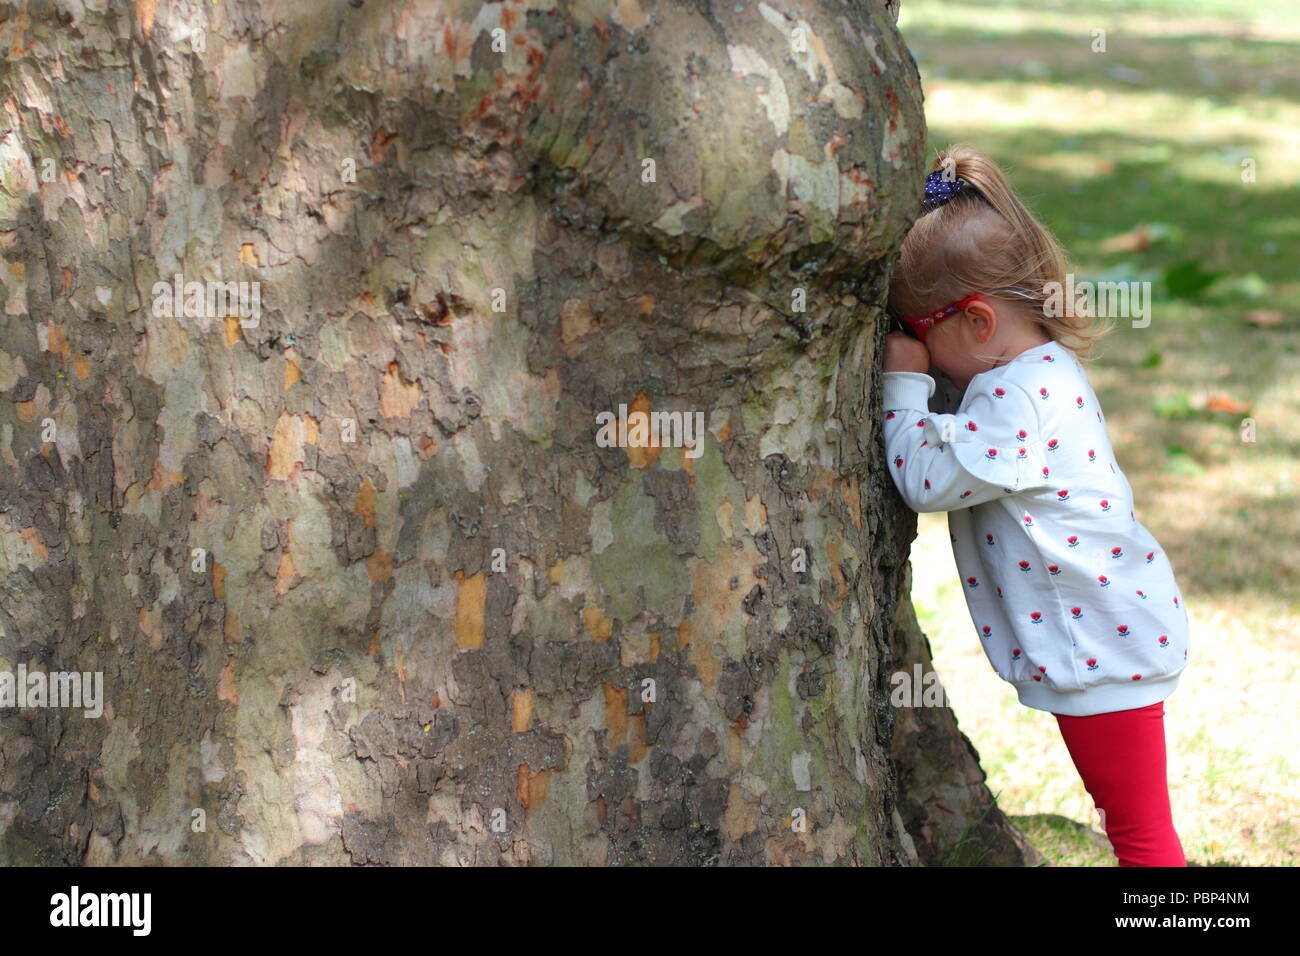 concept of crying, sulking or playing hide and seek by a young girl Stock Photo